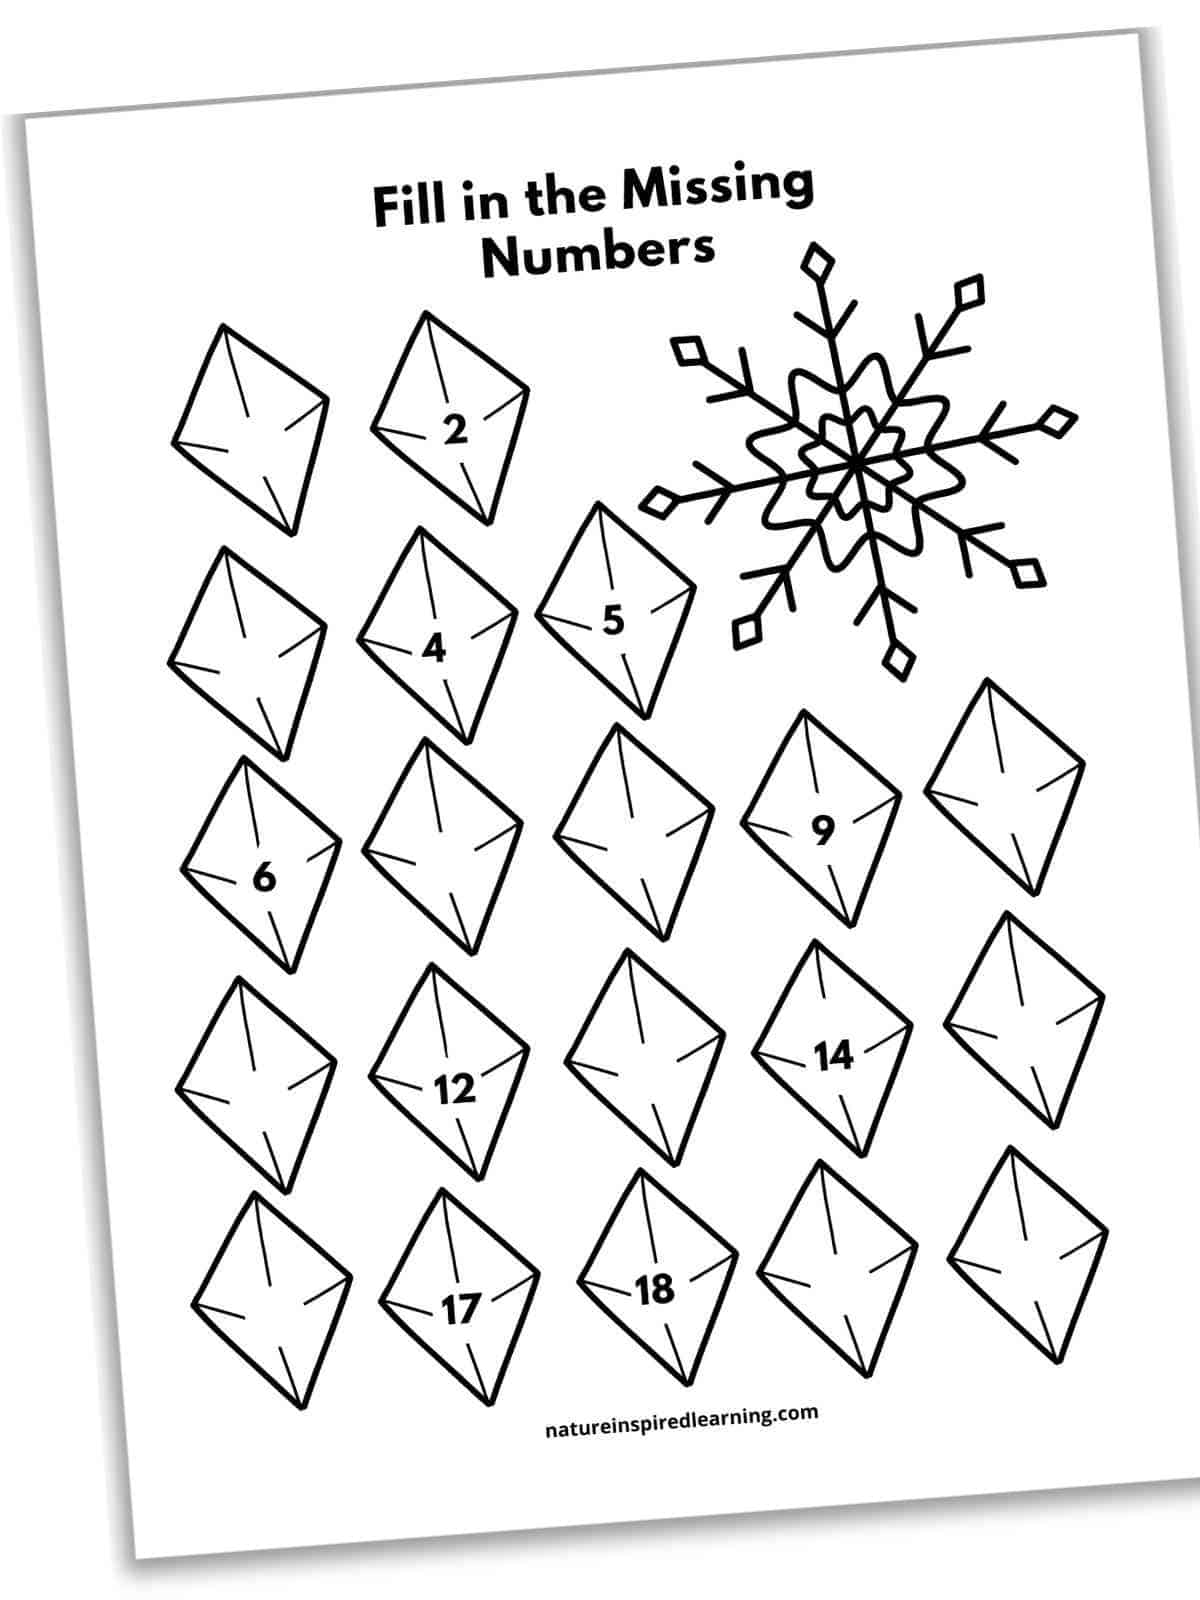 worksheet with a snowflake and ice crystals with numbers up to 20 within the crystals on the sheet. 11 of the 20 numbers missing